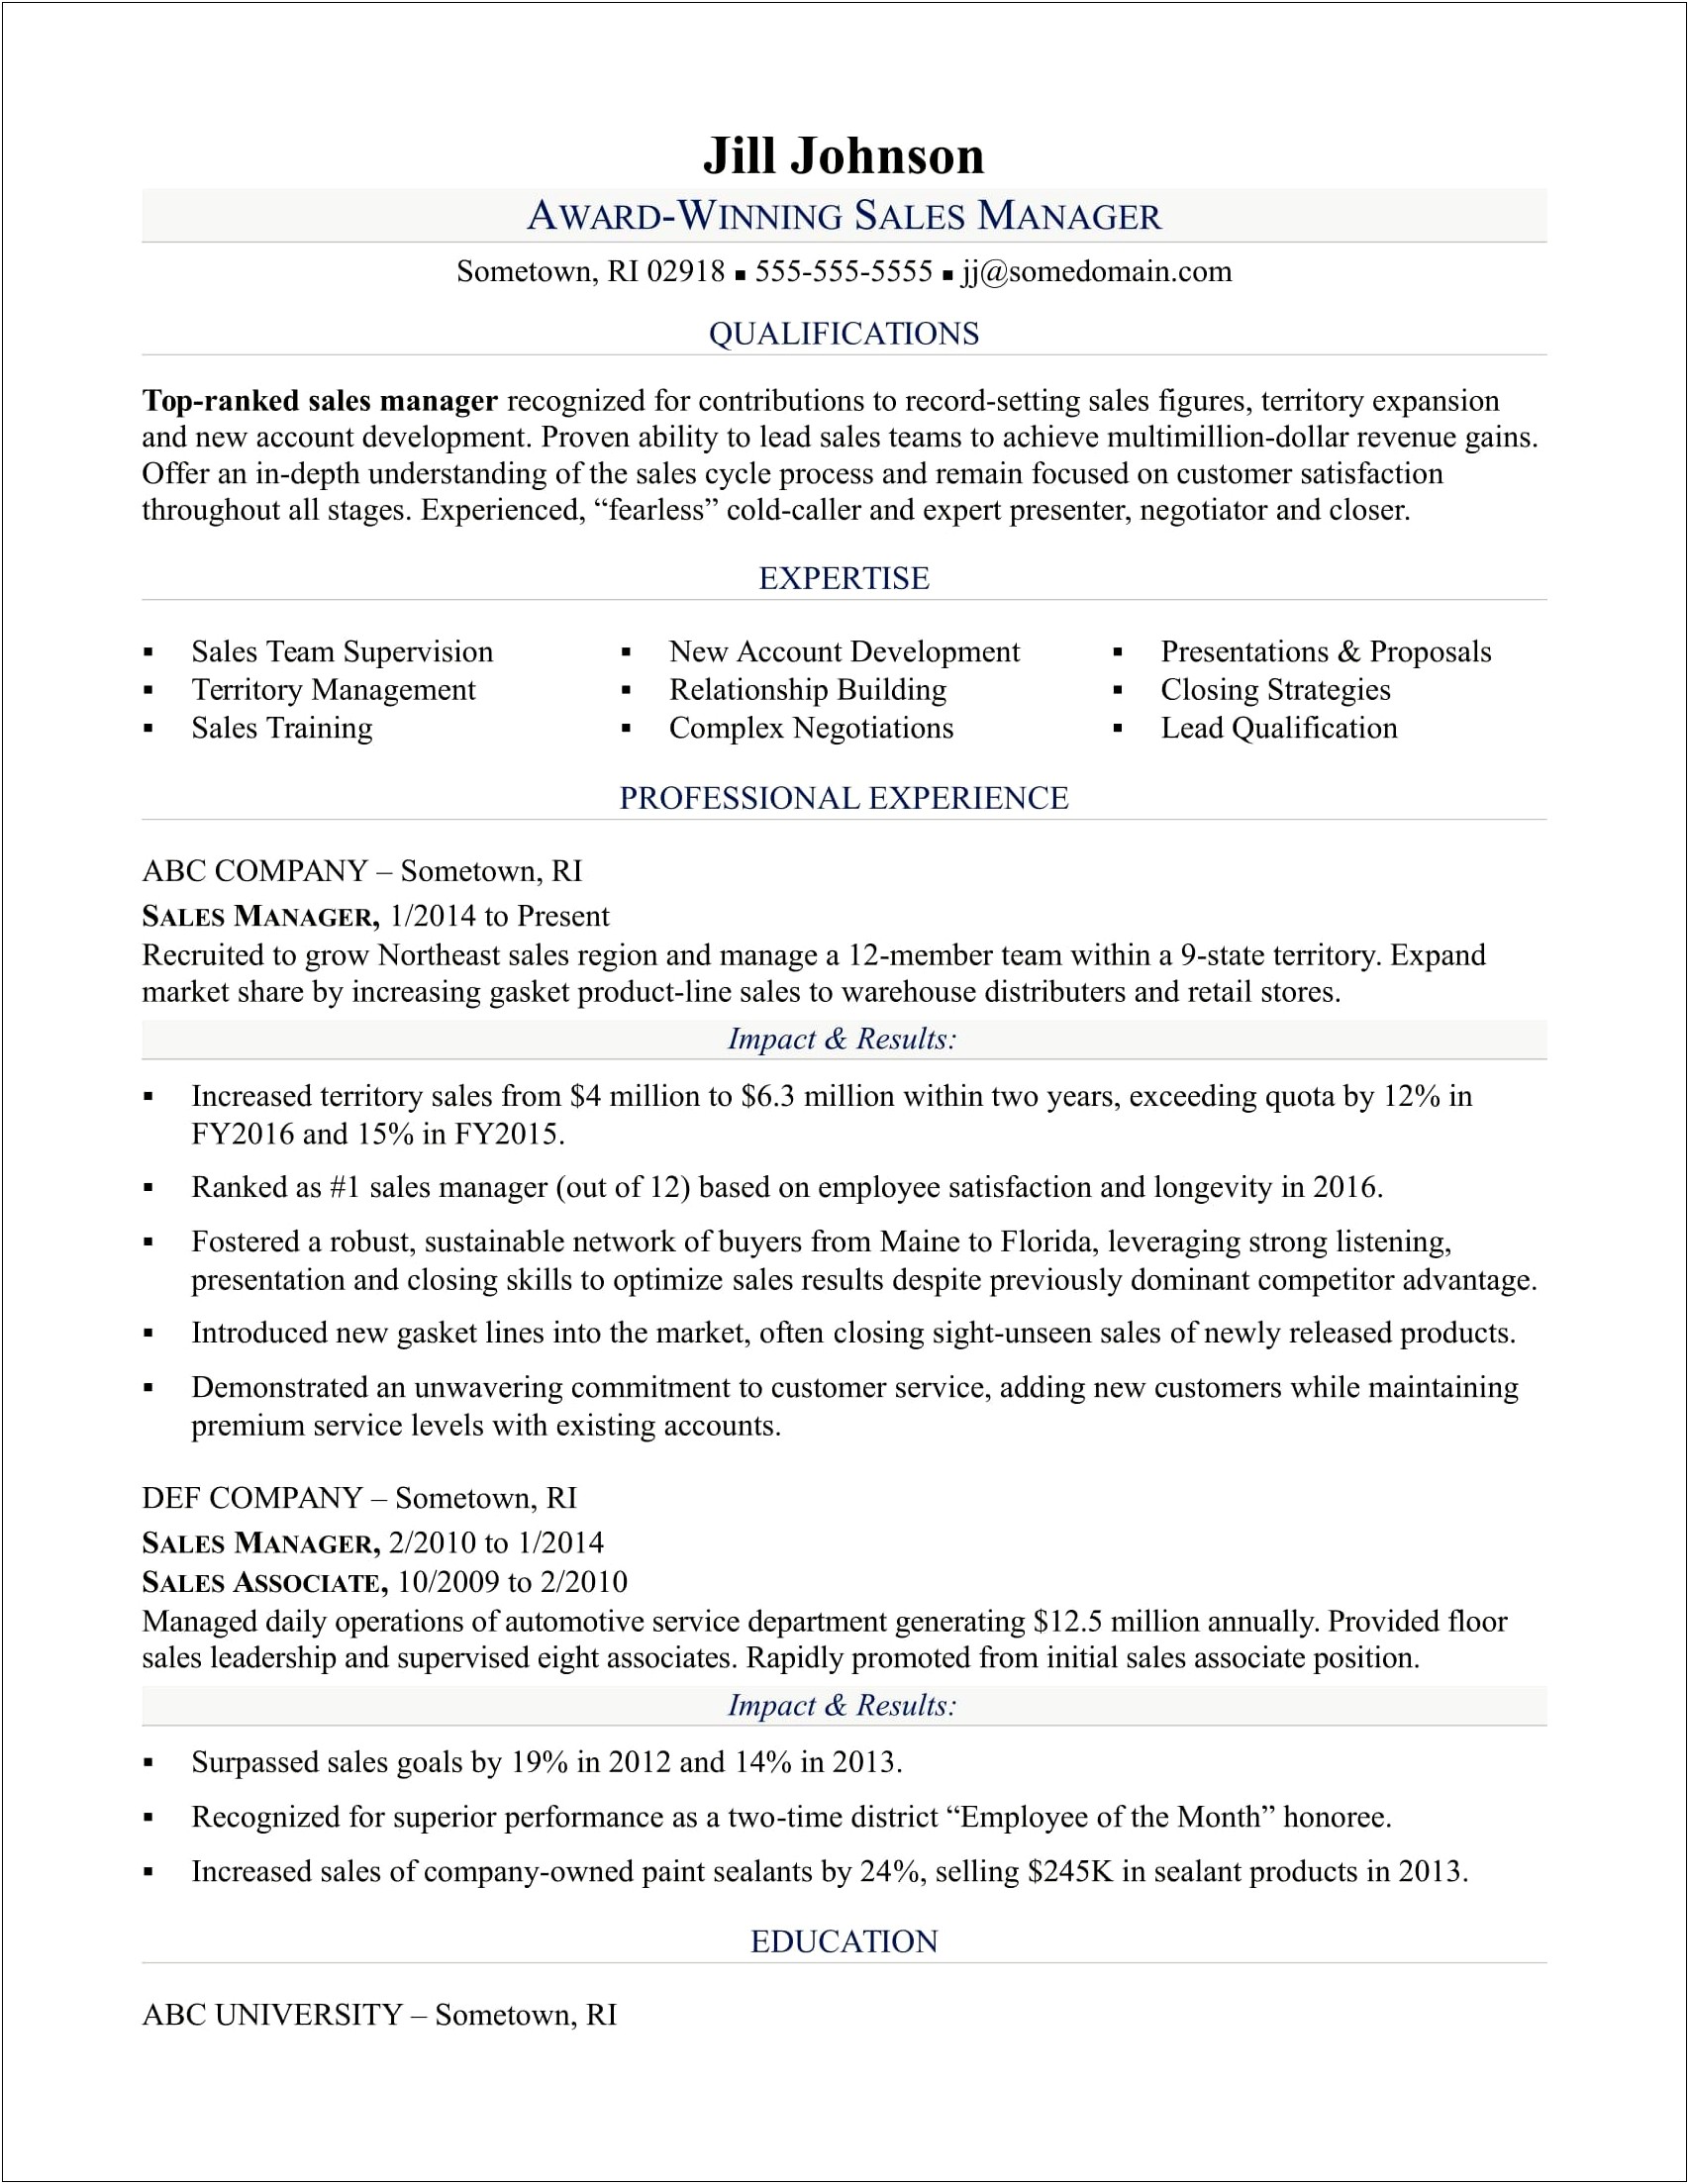 Resume Example For Air Force Base Type Job